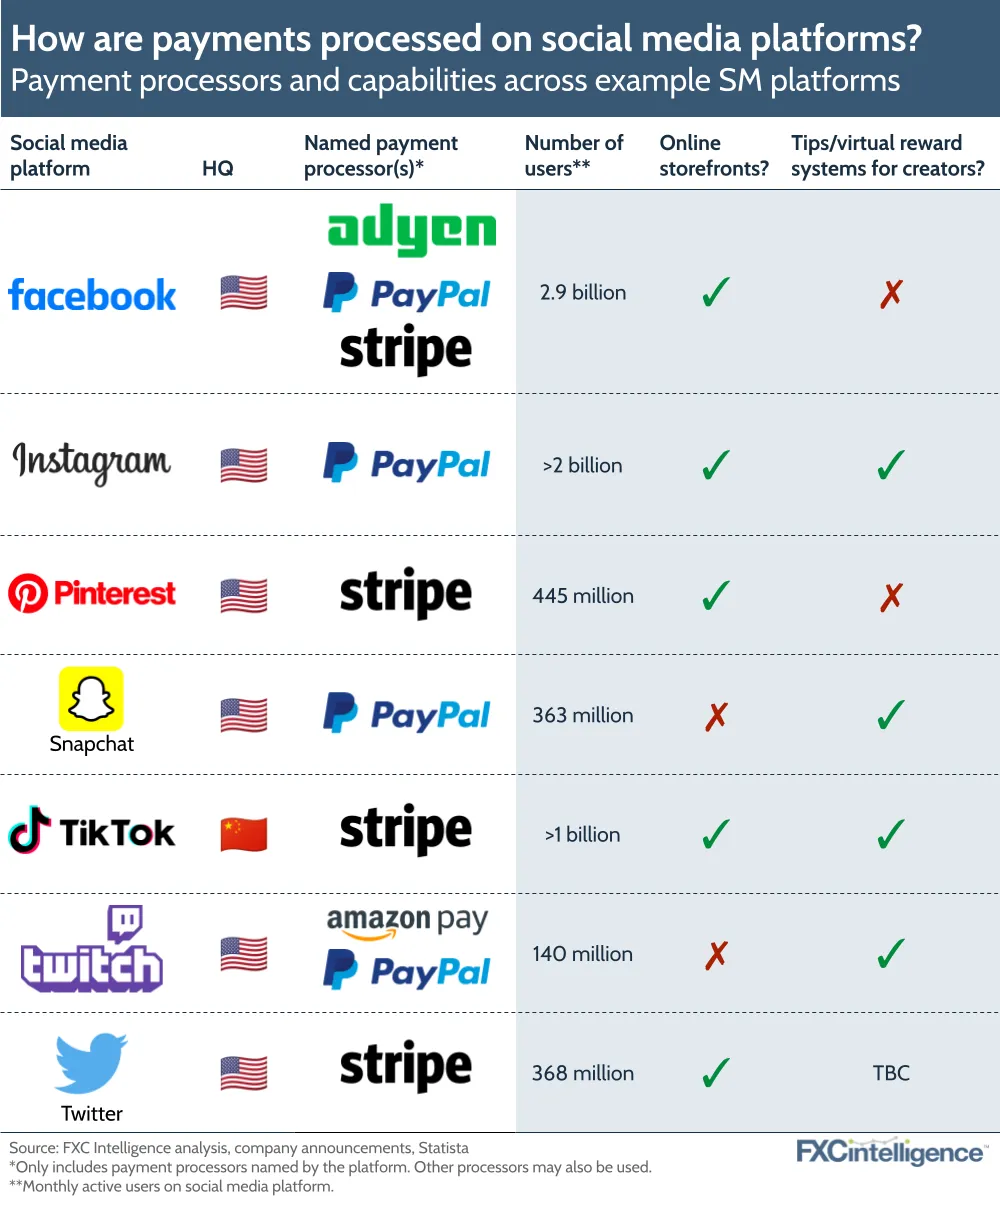 How are payments processed on social media platforms?
Payment processors and capabilities across example SM platforms